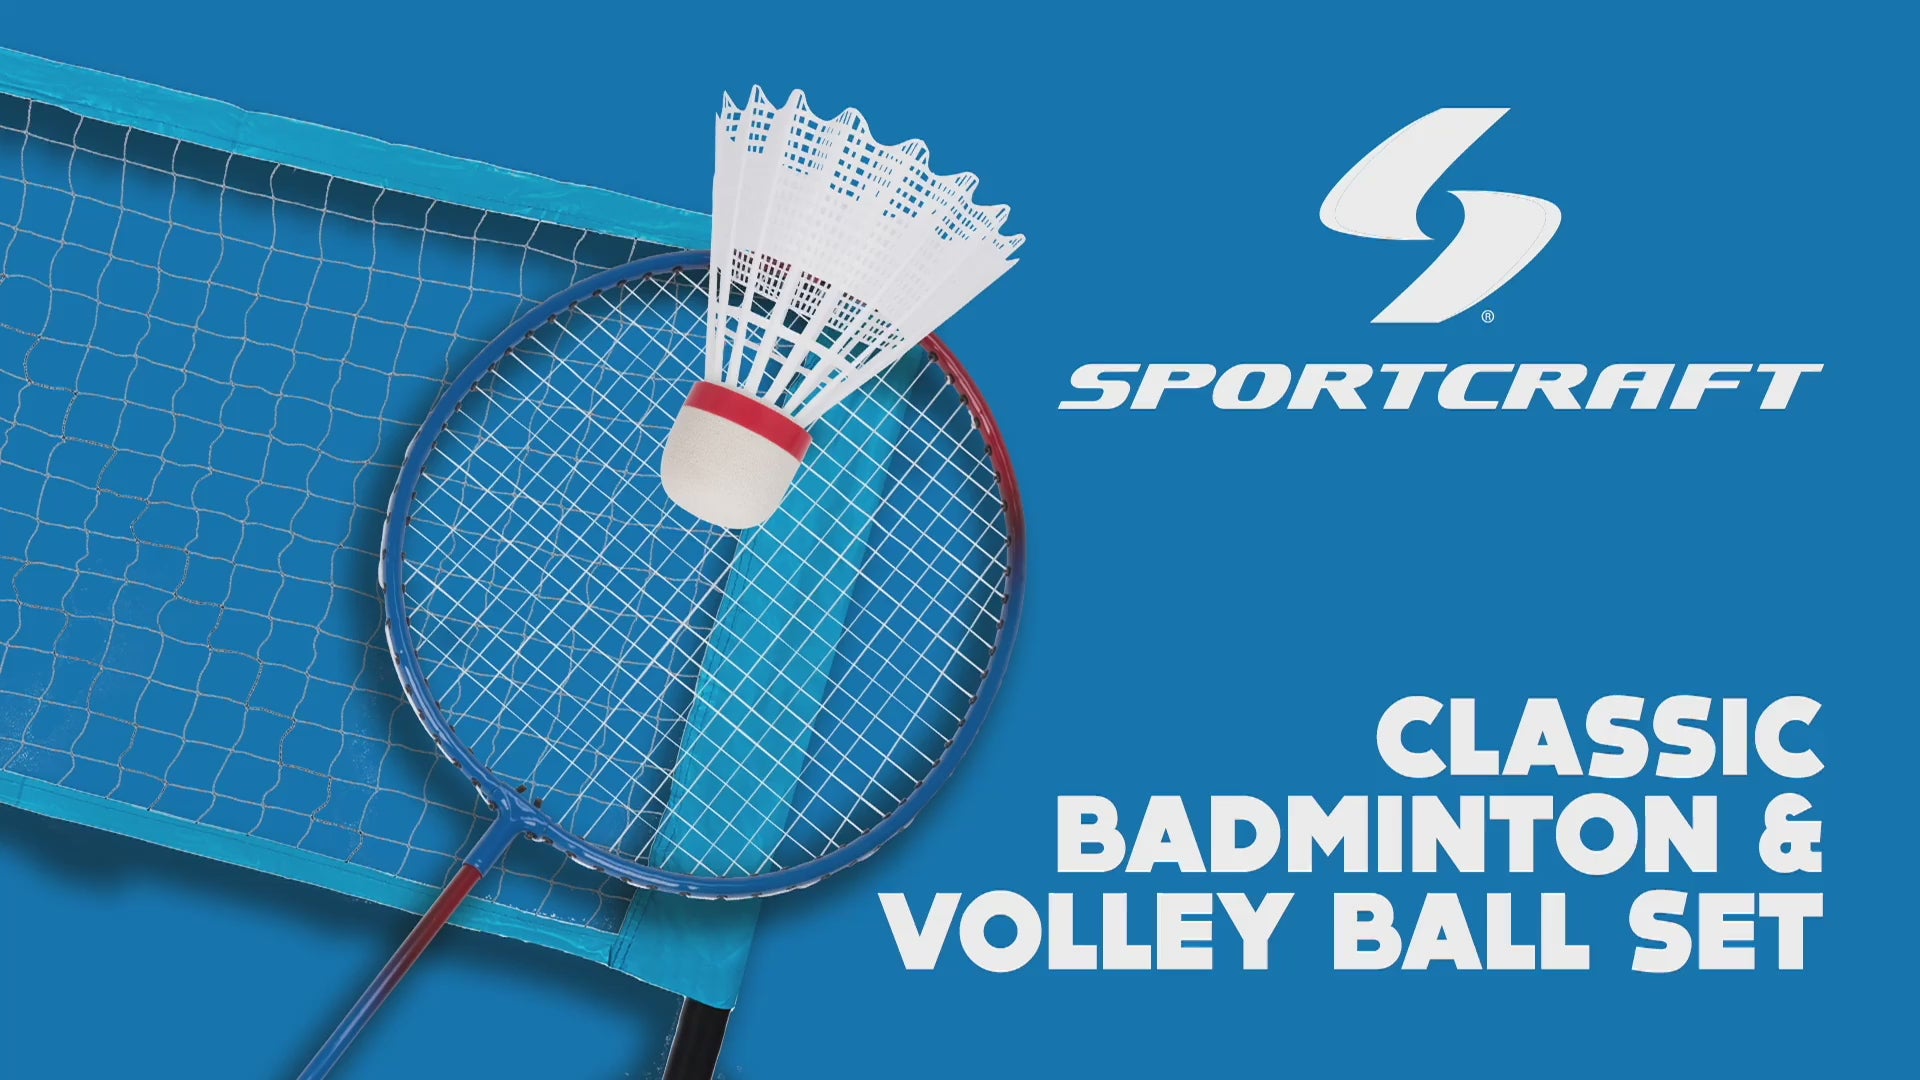 Sportcraft Badminton Volley Ball Set - Video showing product